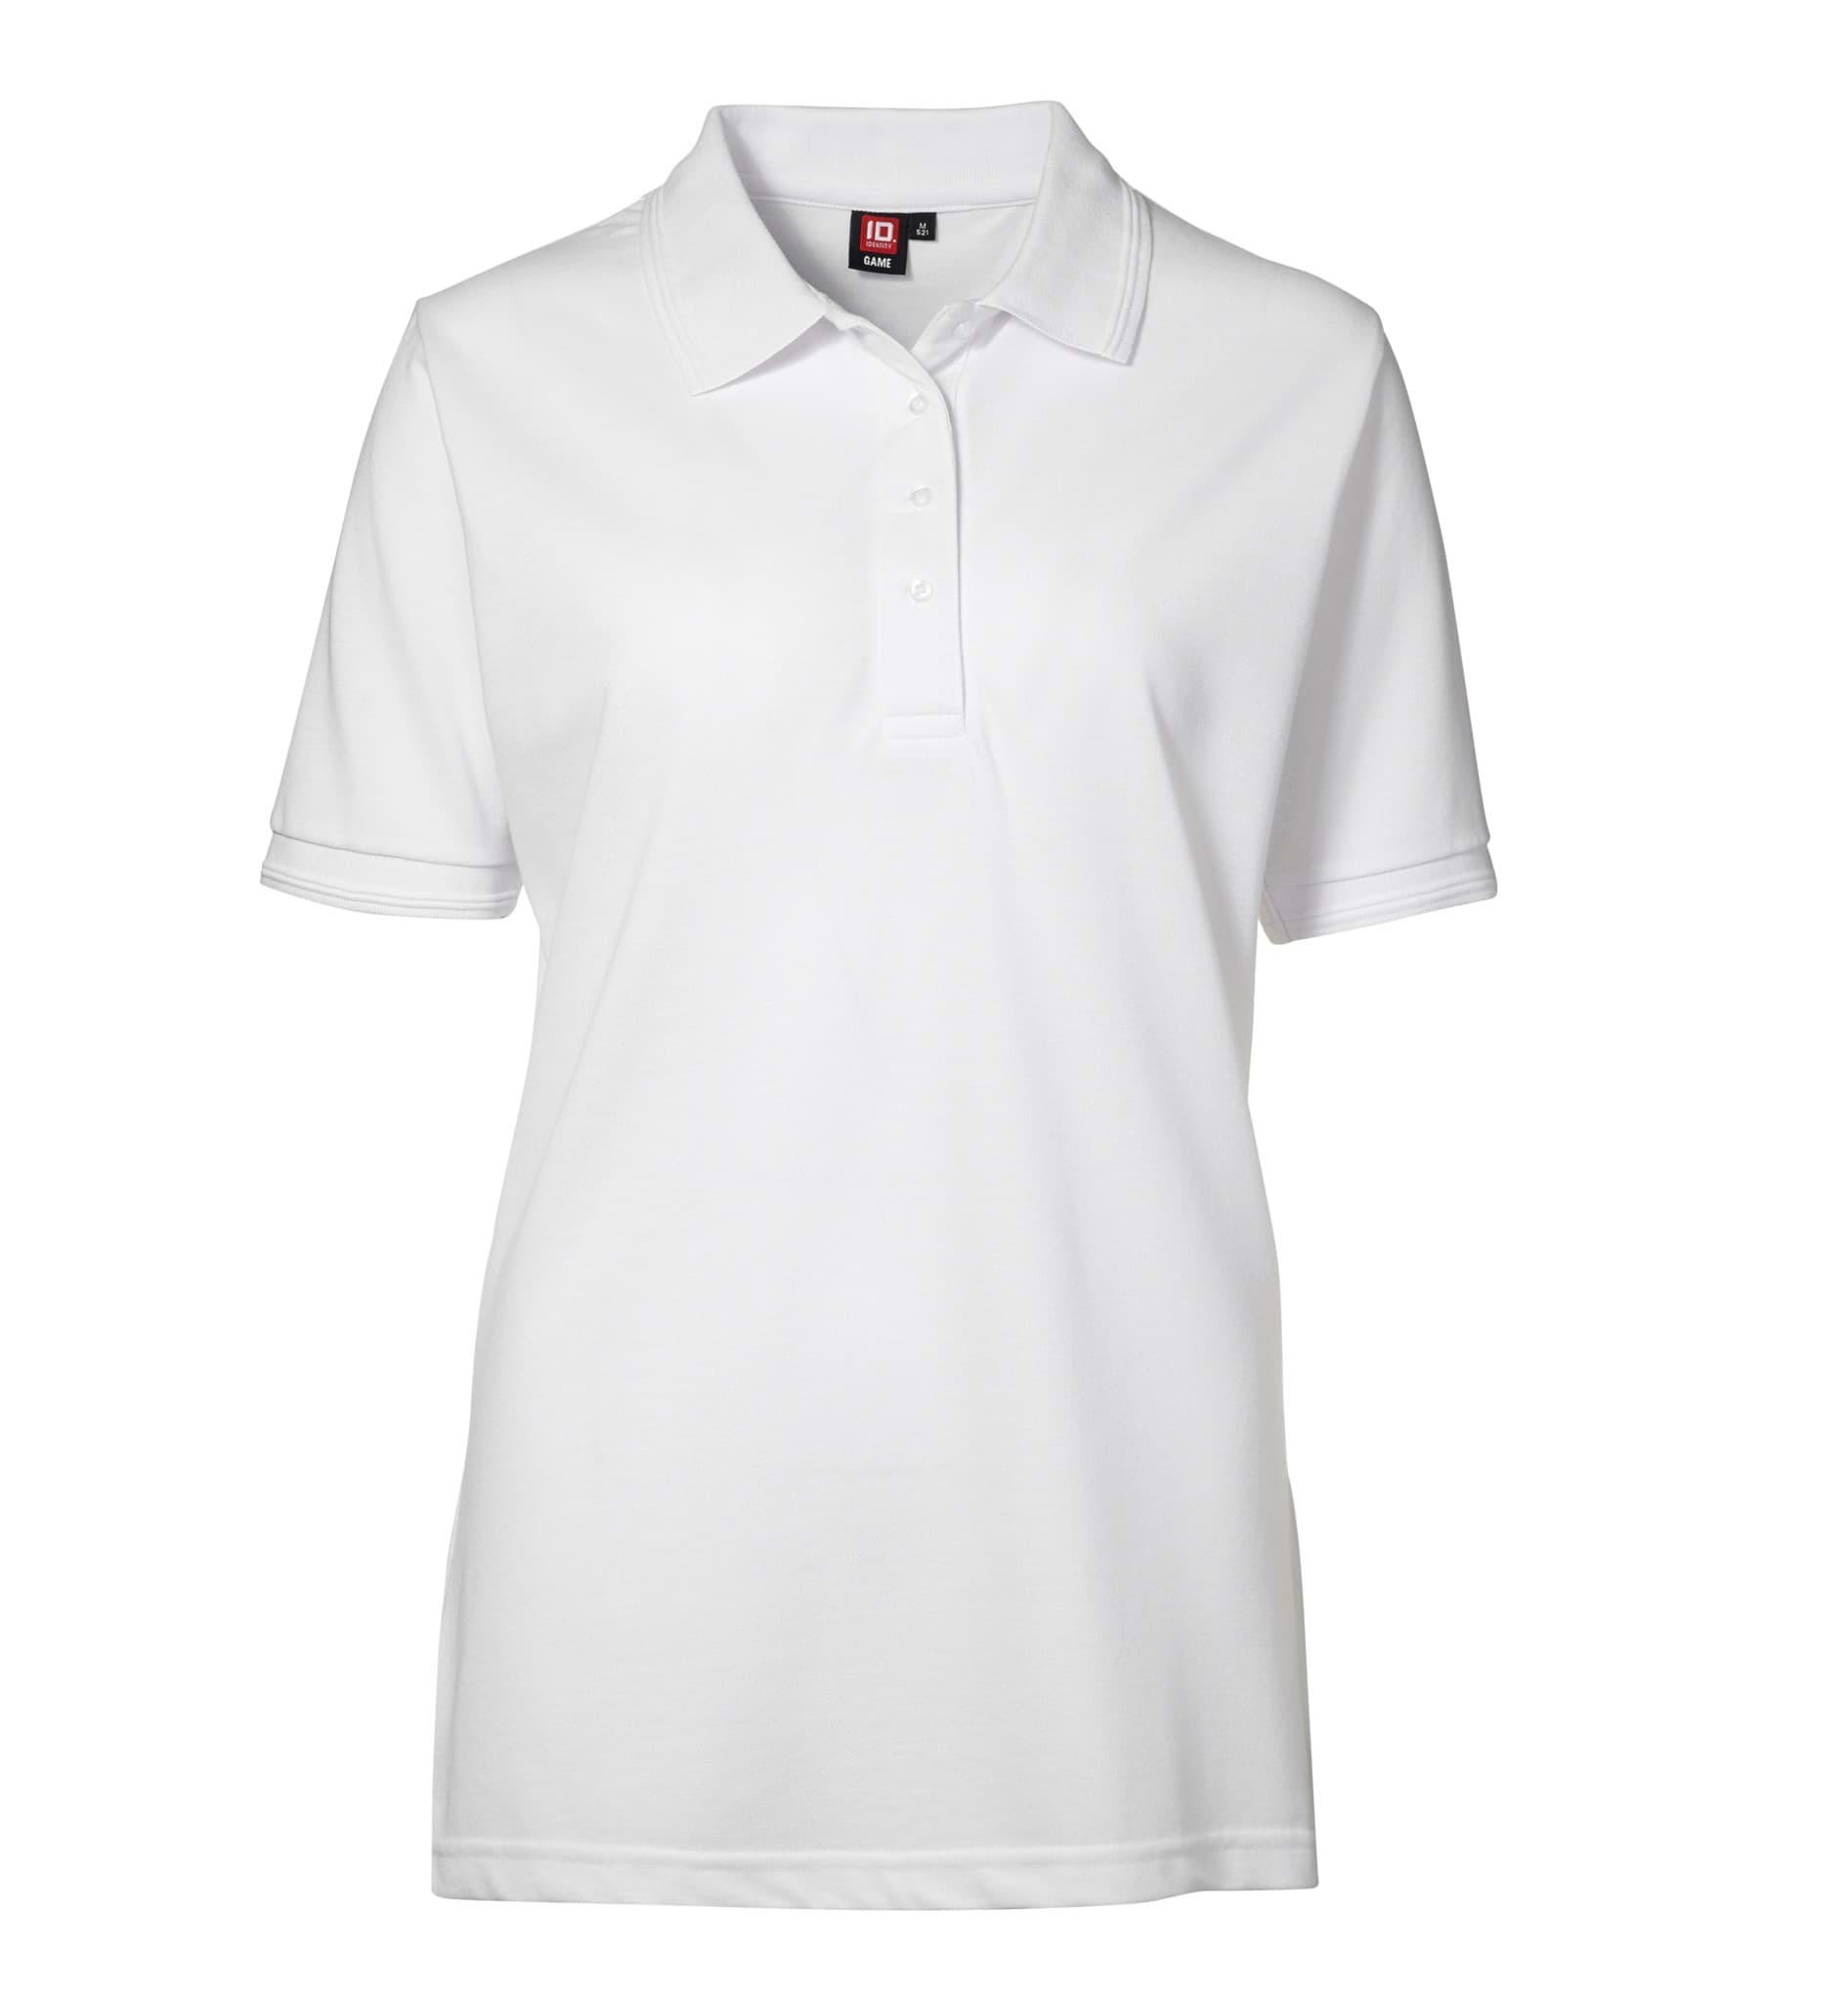 Picture of Classic men's polo shirt